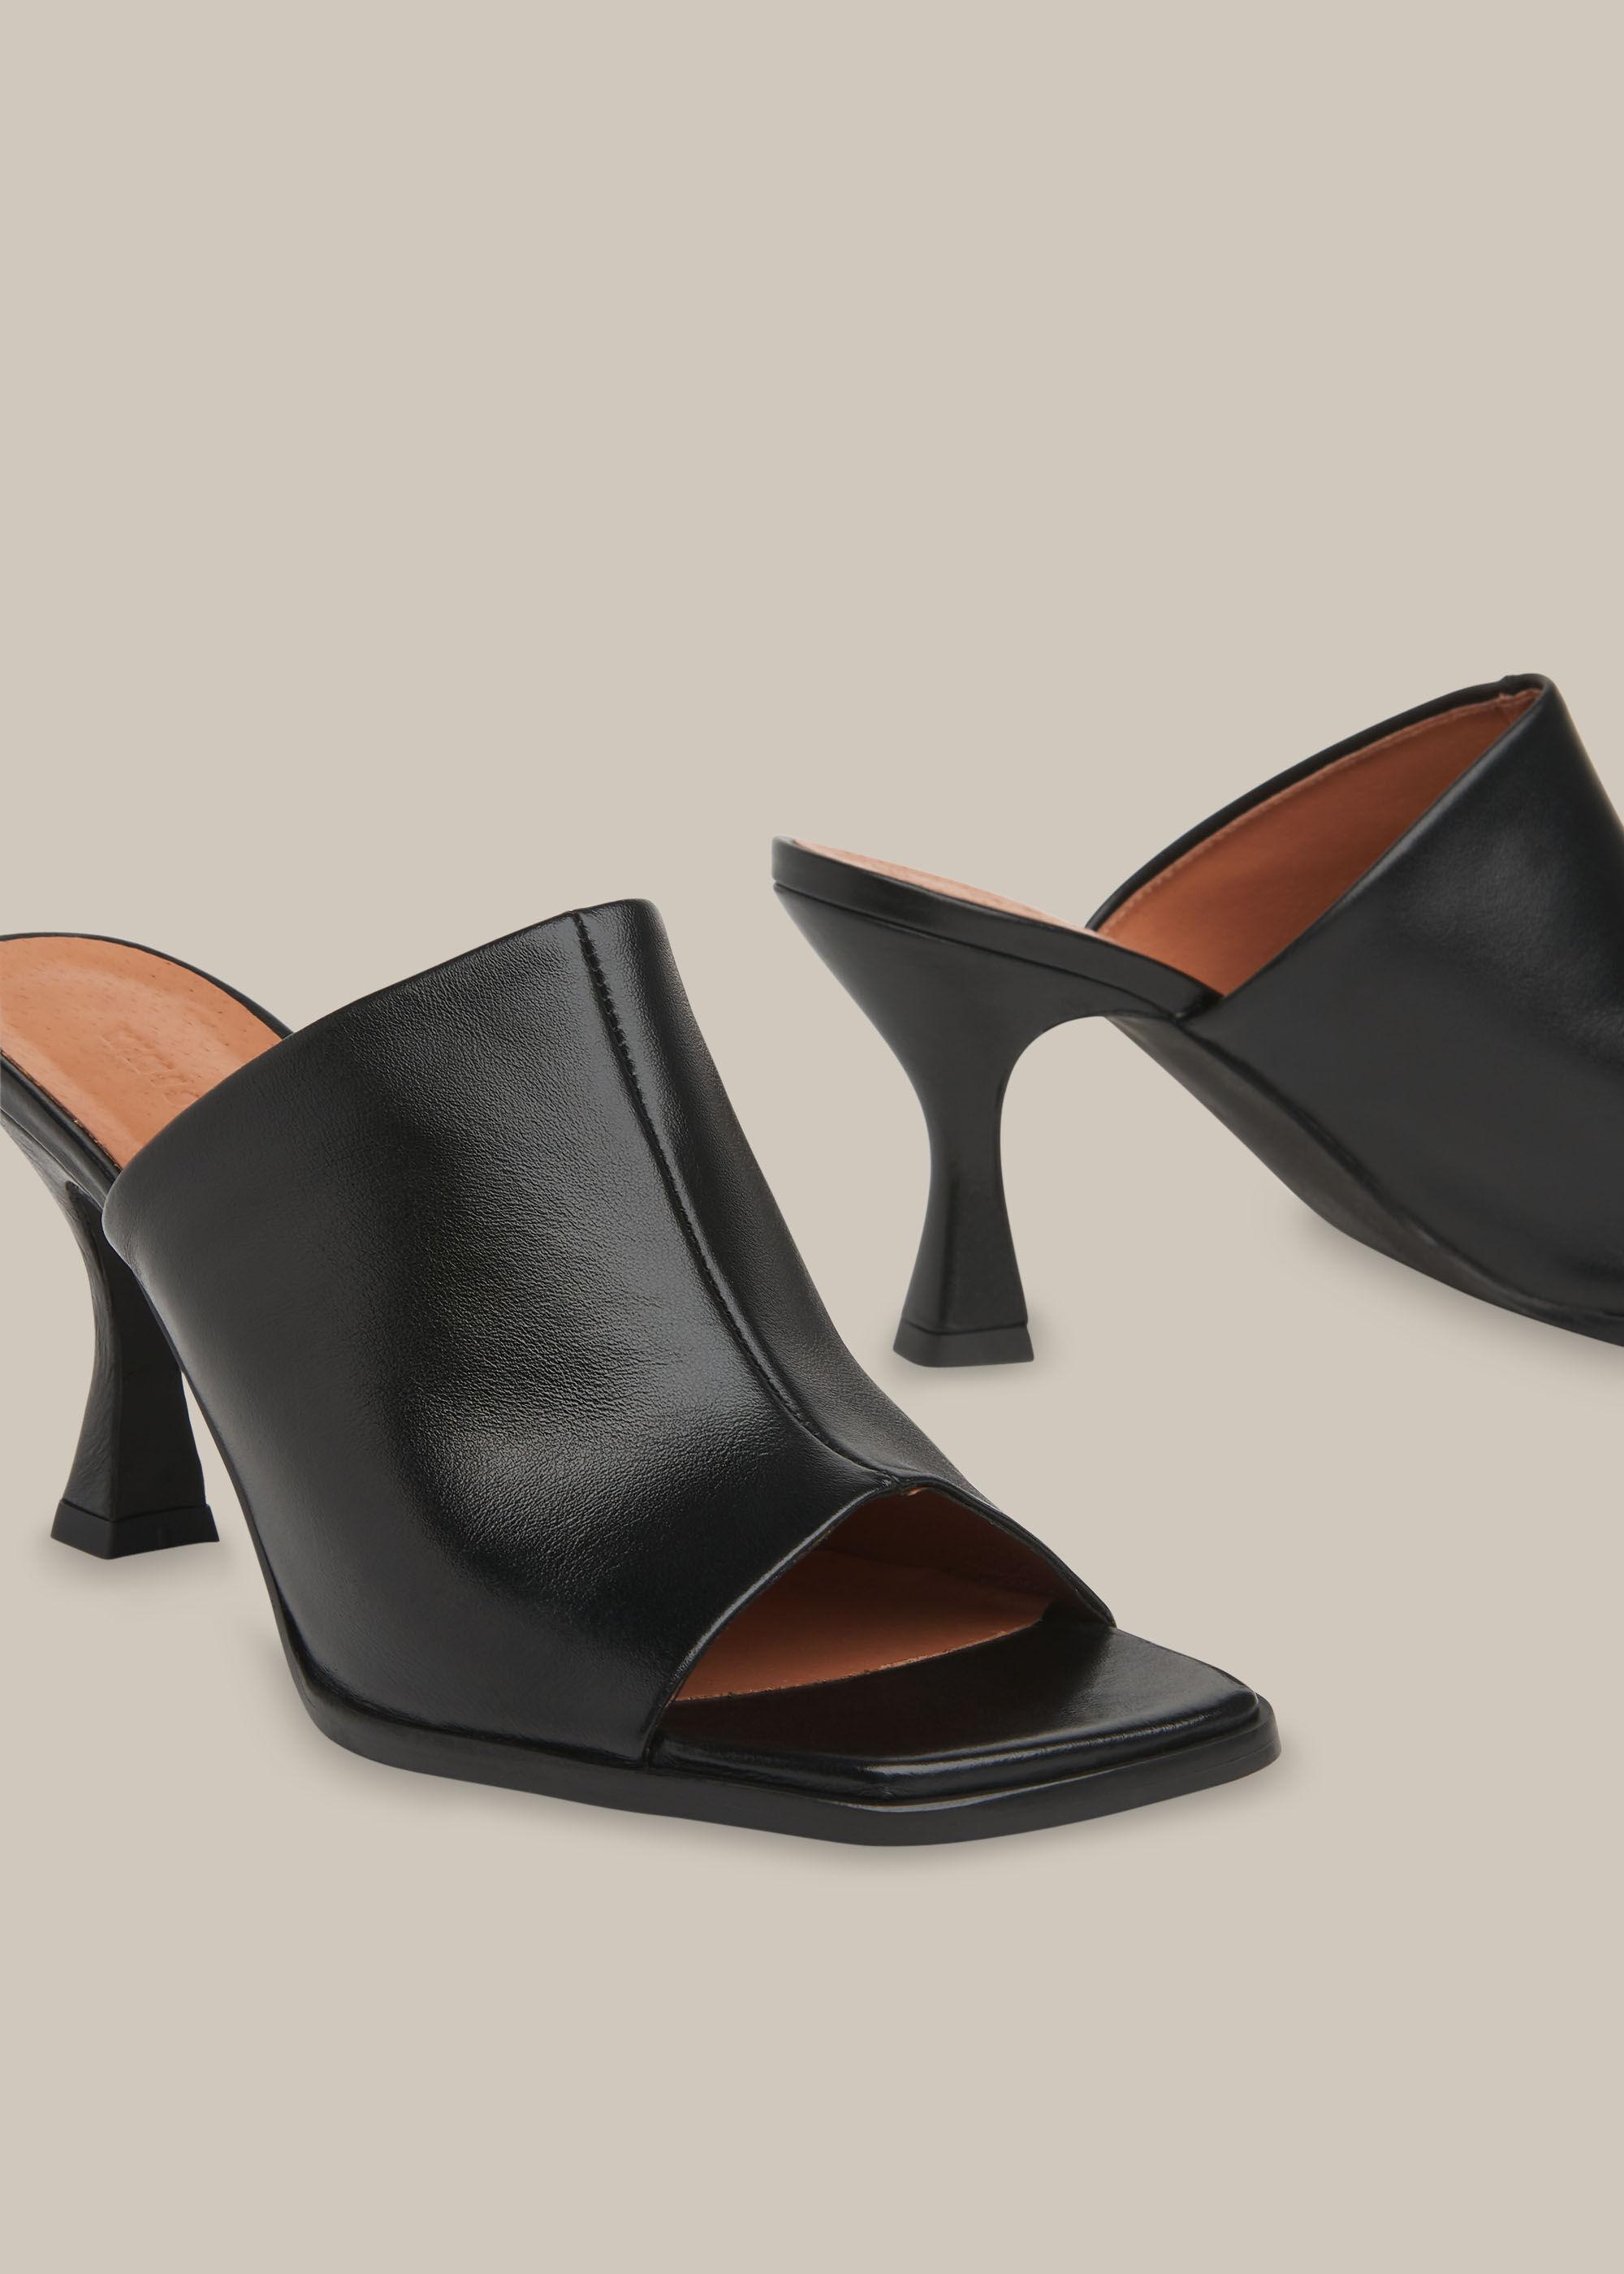 Whistles Leather Aerin Square Toe Mule in Black | Lyst